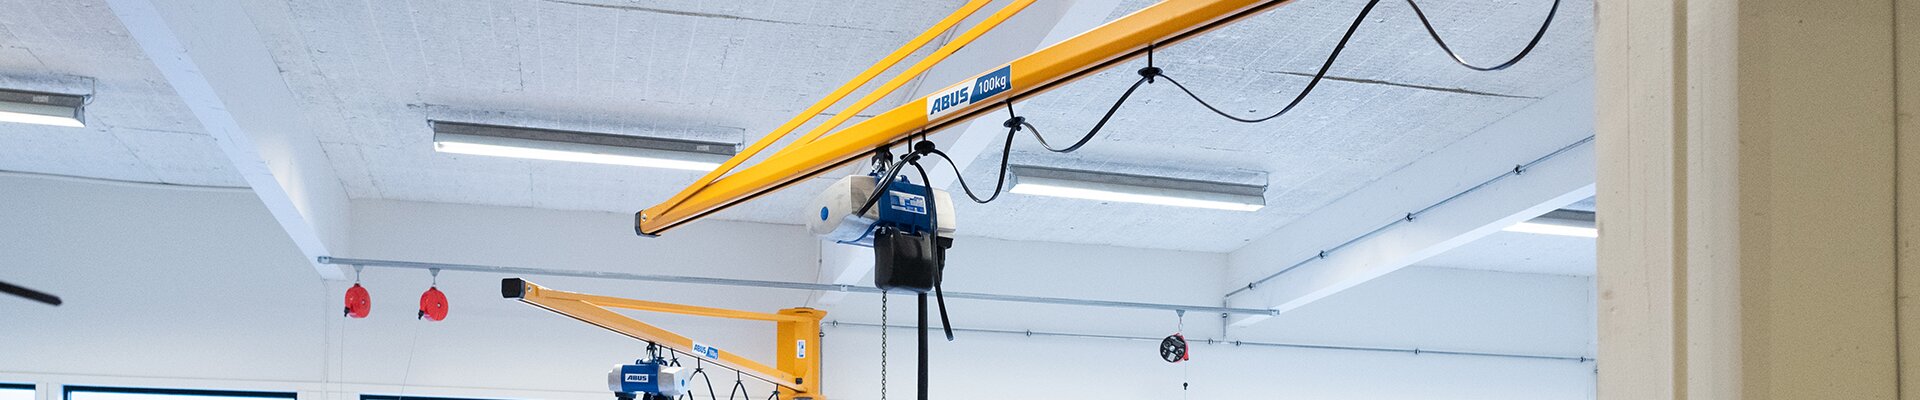 ABUS cranes in disabled workshop for woodwork in Norway 